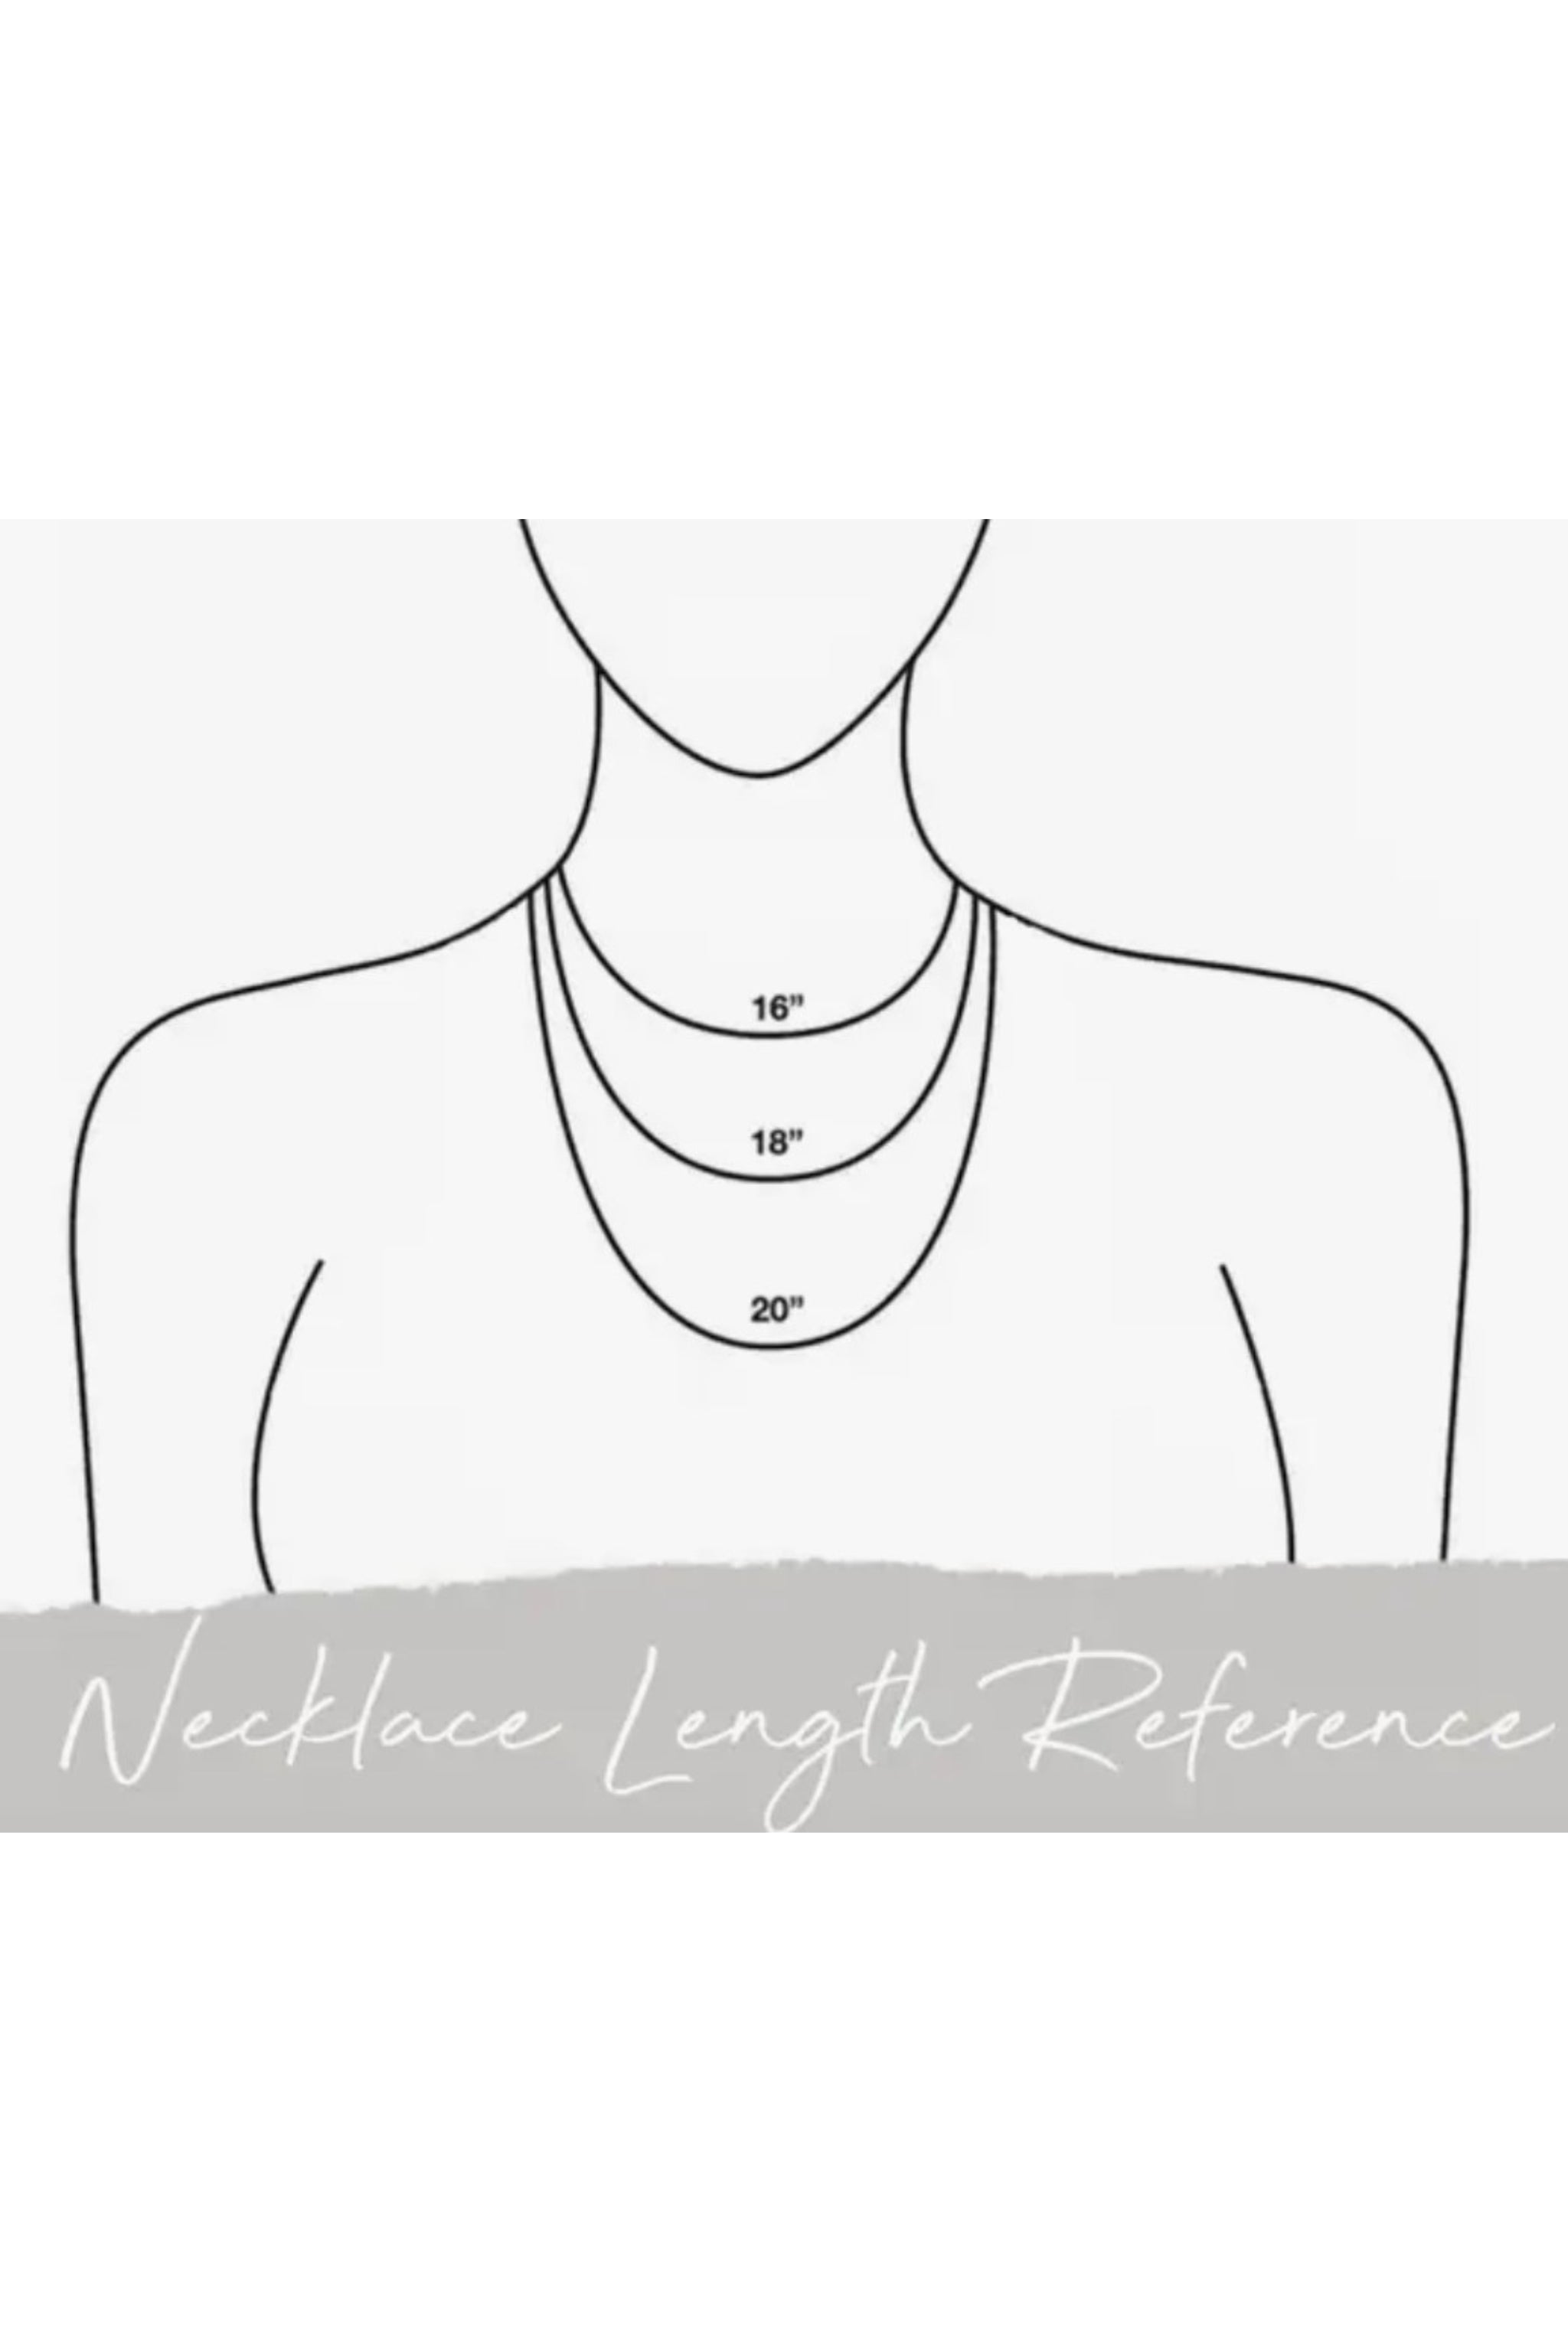 Mens Necklace Size Chart in Illustrator, Portable Documents - Download |  Template.net